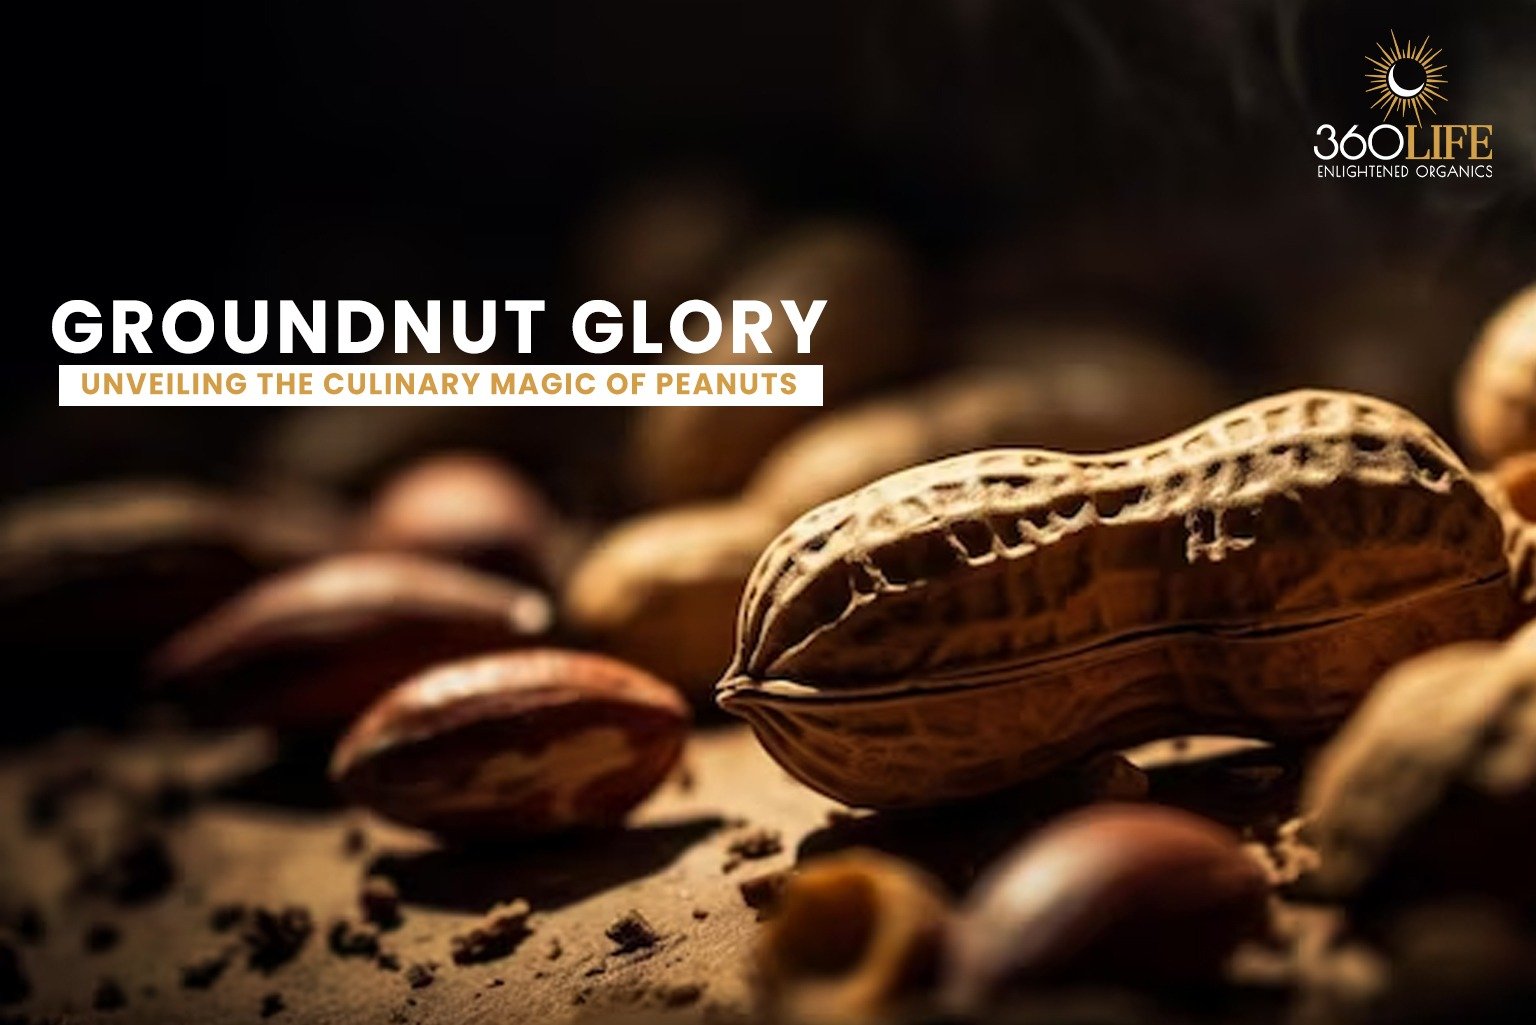 Groundnut Glory: Unveiling the Culinary Magic of Peanuts